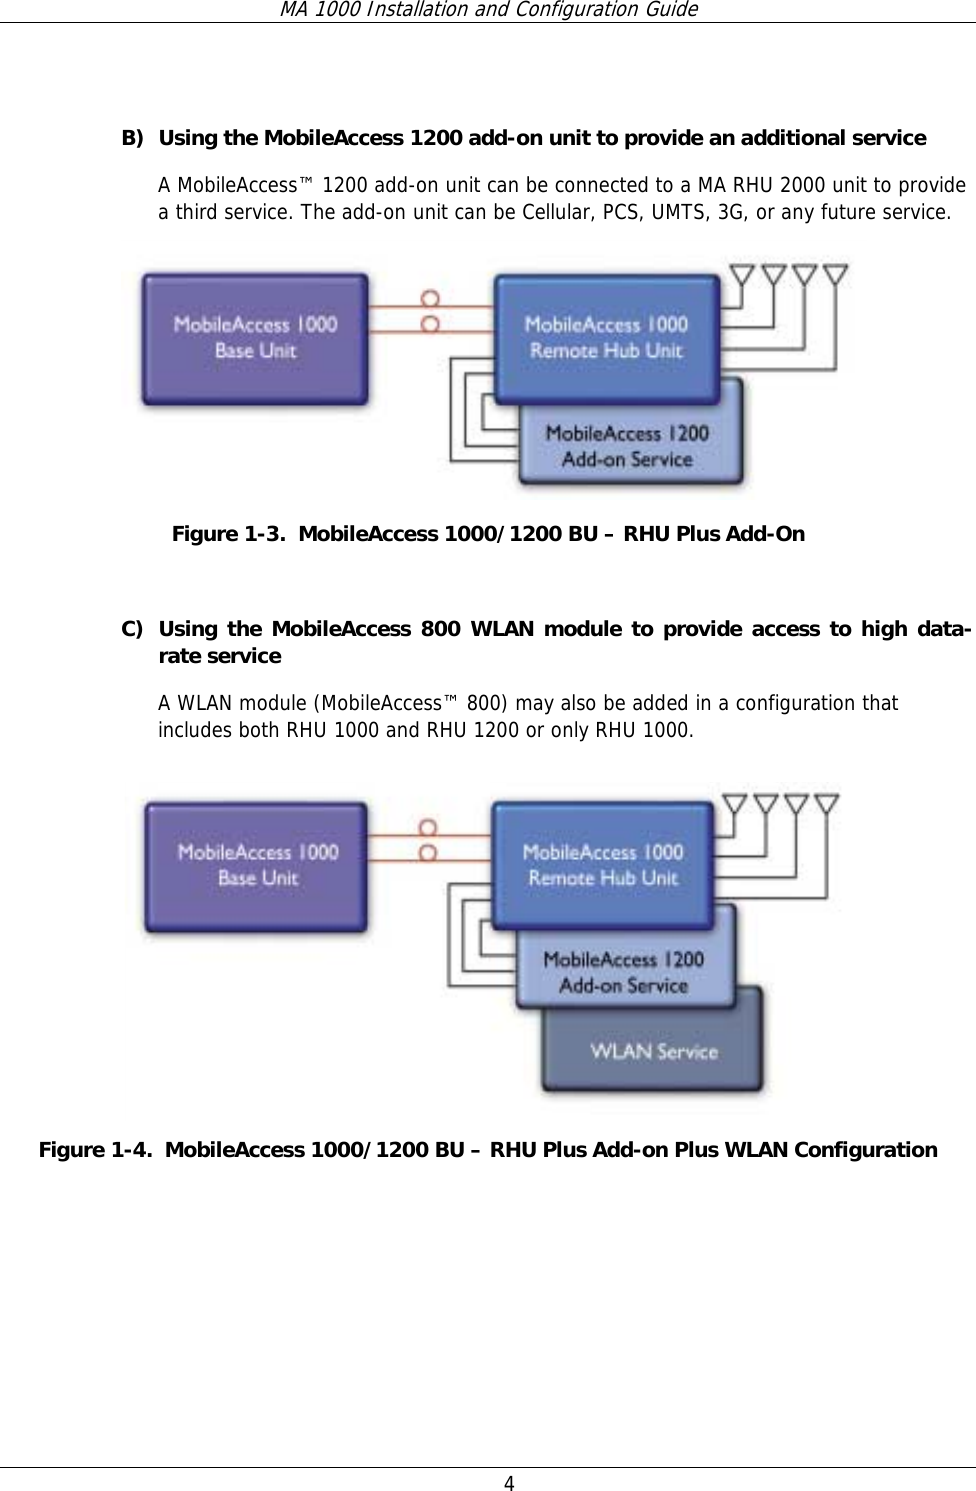 MA 1000 Installation and Configuration Guide  4    B) Using the MobileAccess 1200 add-on unit to provide an additional service A MobileAccess™ 1200 add-on unit can be connected to a MA RHU 2000 unit to provide a third service. The add-on unit can be Cellular, PCS, UMTS, 3G, or any future service.  Figure  1-3.  MobileAccess 1000/1200 BU – RHU Plus Add-On  C) Using the MobileAccess 800 WLAN module to provide access to high data-rate service A WLAN module (MobileAccess™ 800) may also be added in a configuration that includes both RHU 1000 and RHU 1200 or only RHU 1000.    Figure  1-4.  MobileAccess 1000/1200 BU – RHU Plus Add-on Plus WLAN Configuration  